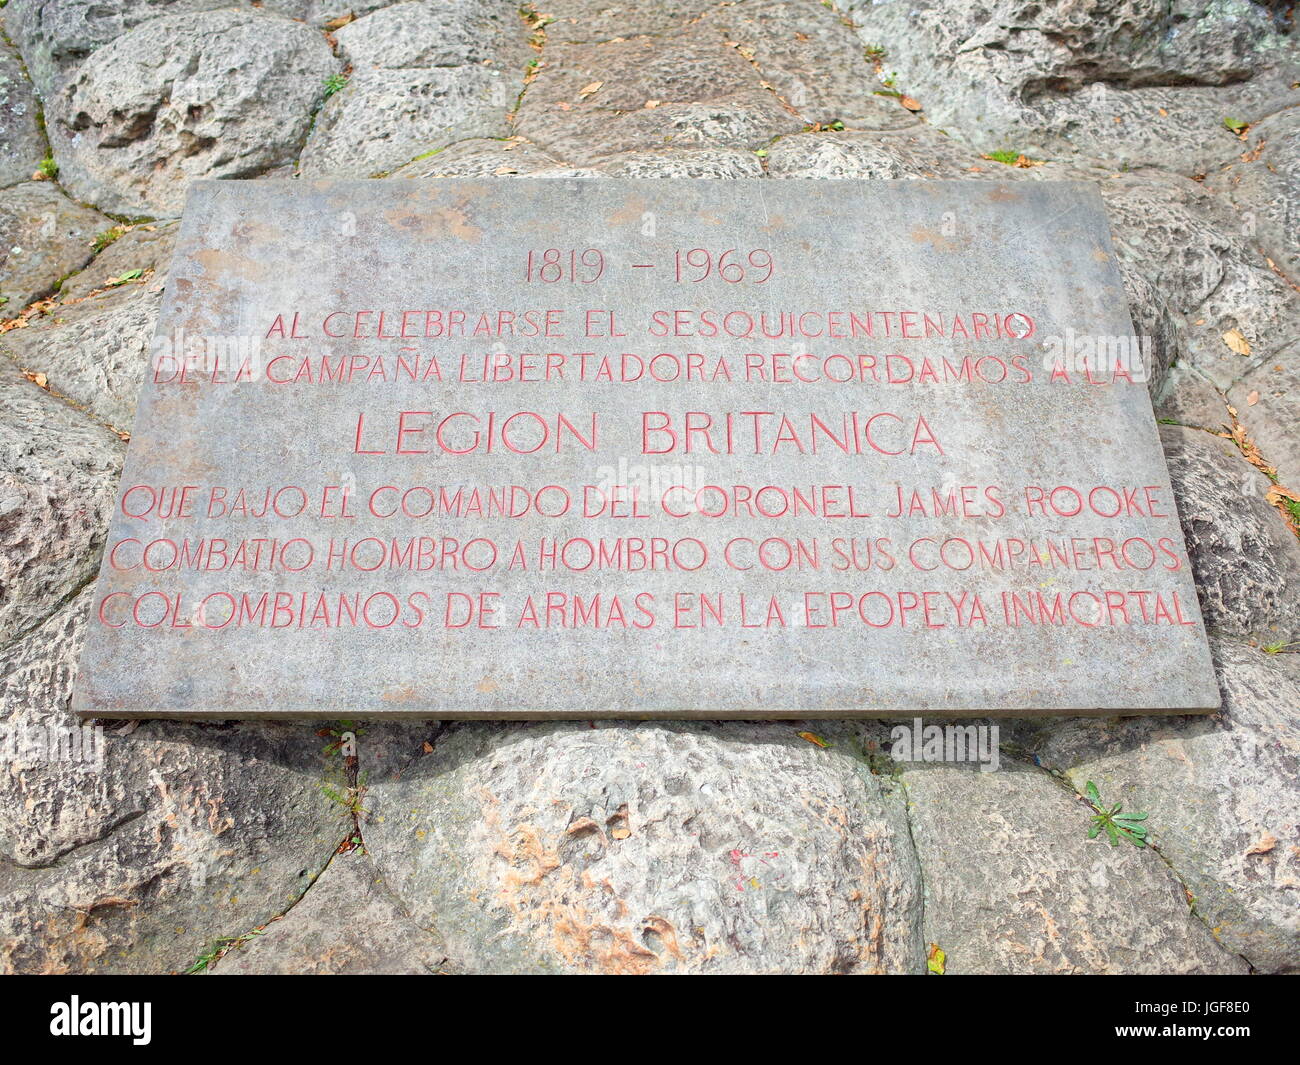 A plaque dedicted to the British Legion who helped Simin Bolivar's army win independence for Colombia at the Puente de Boyaca, the site of the famous  Stock Photo